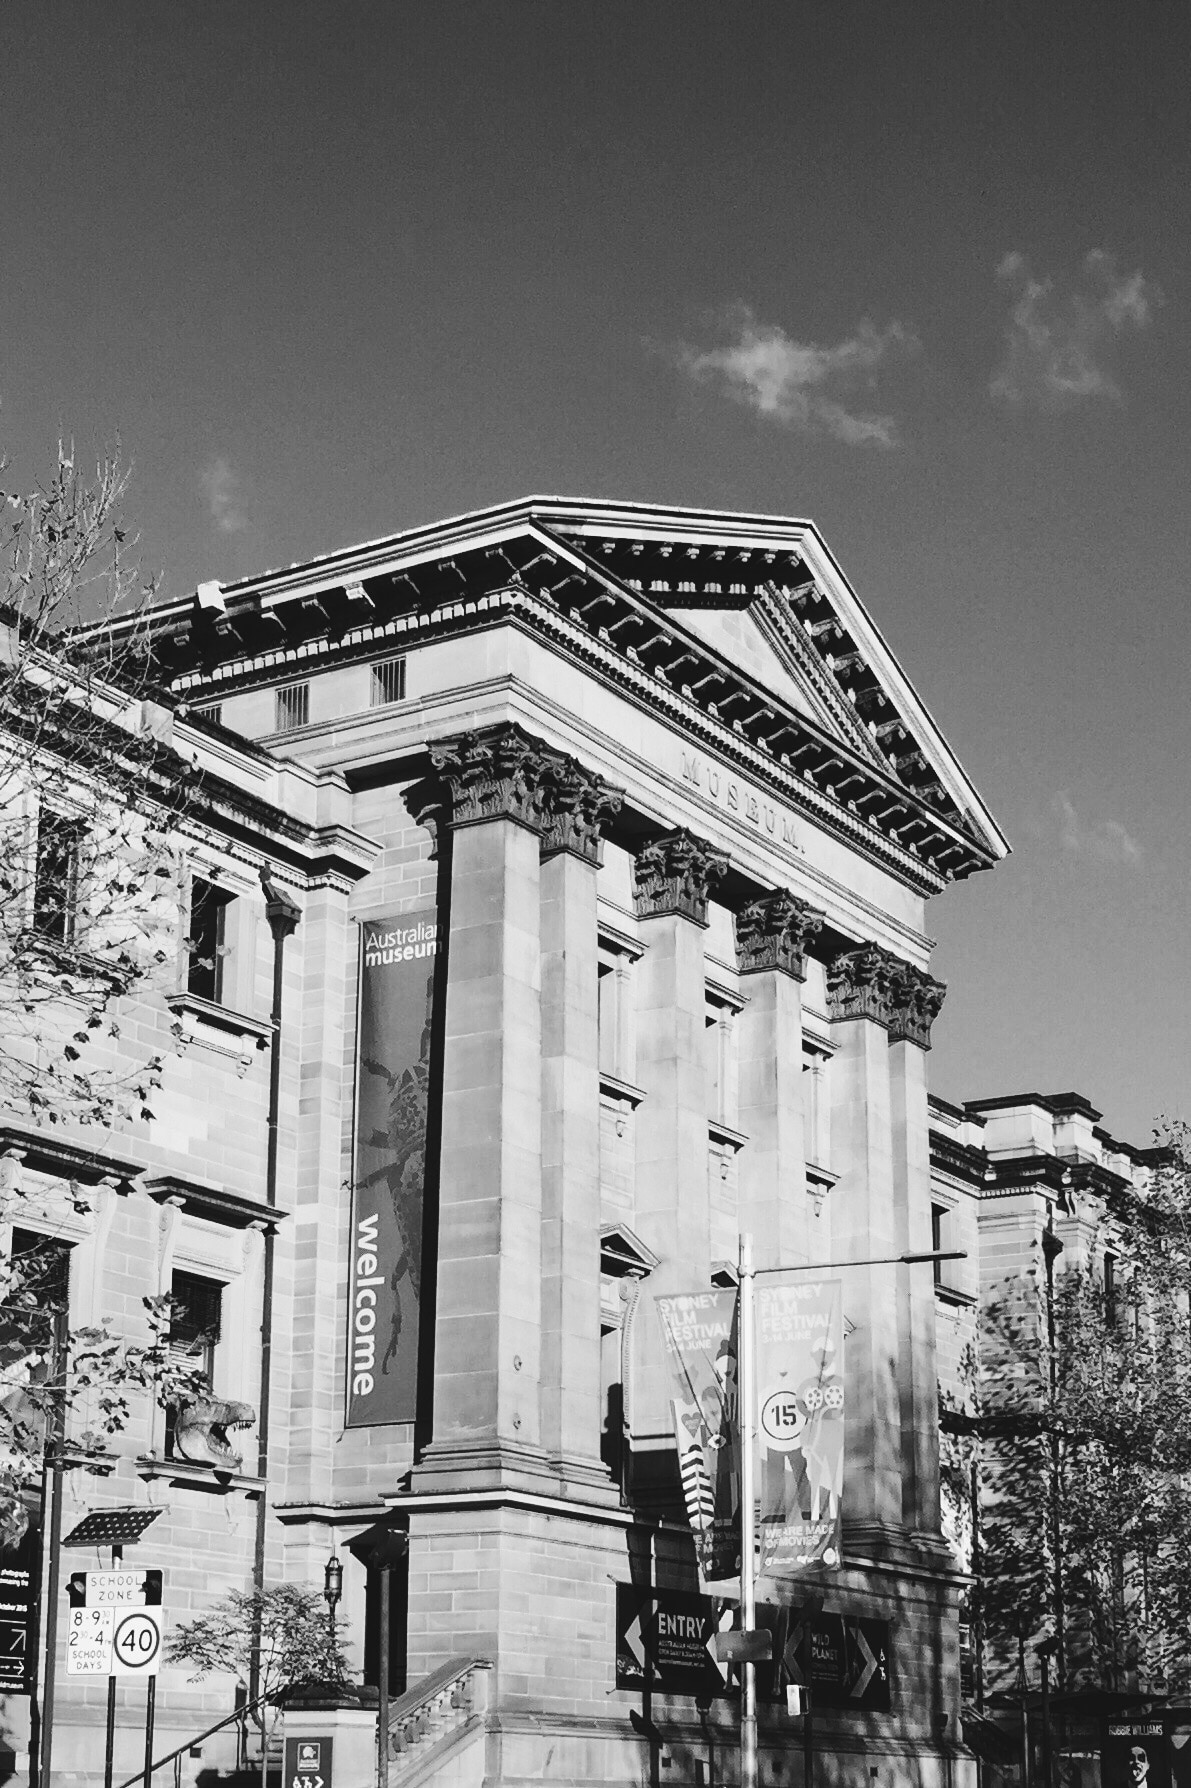 Museums are my favourite places and this one was no exception. #sydney #nationalmuseum #museum #history #stunningstructures #blackandwhite #australia